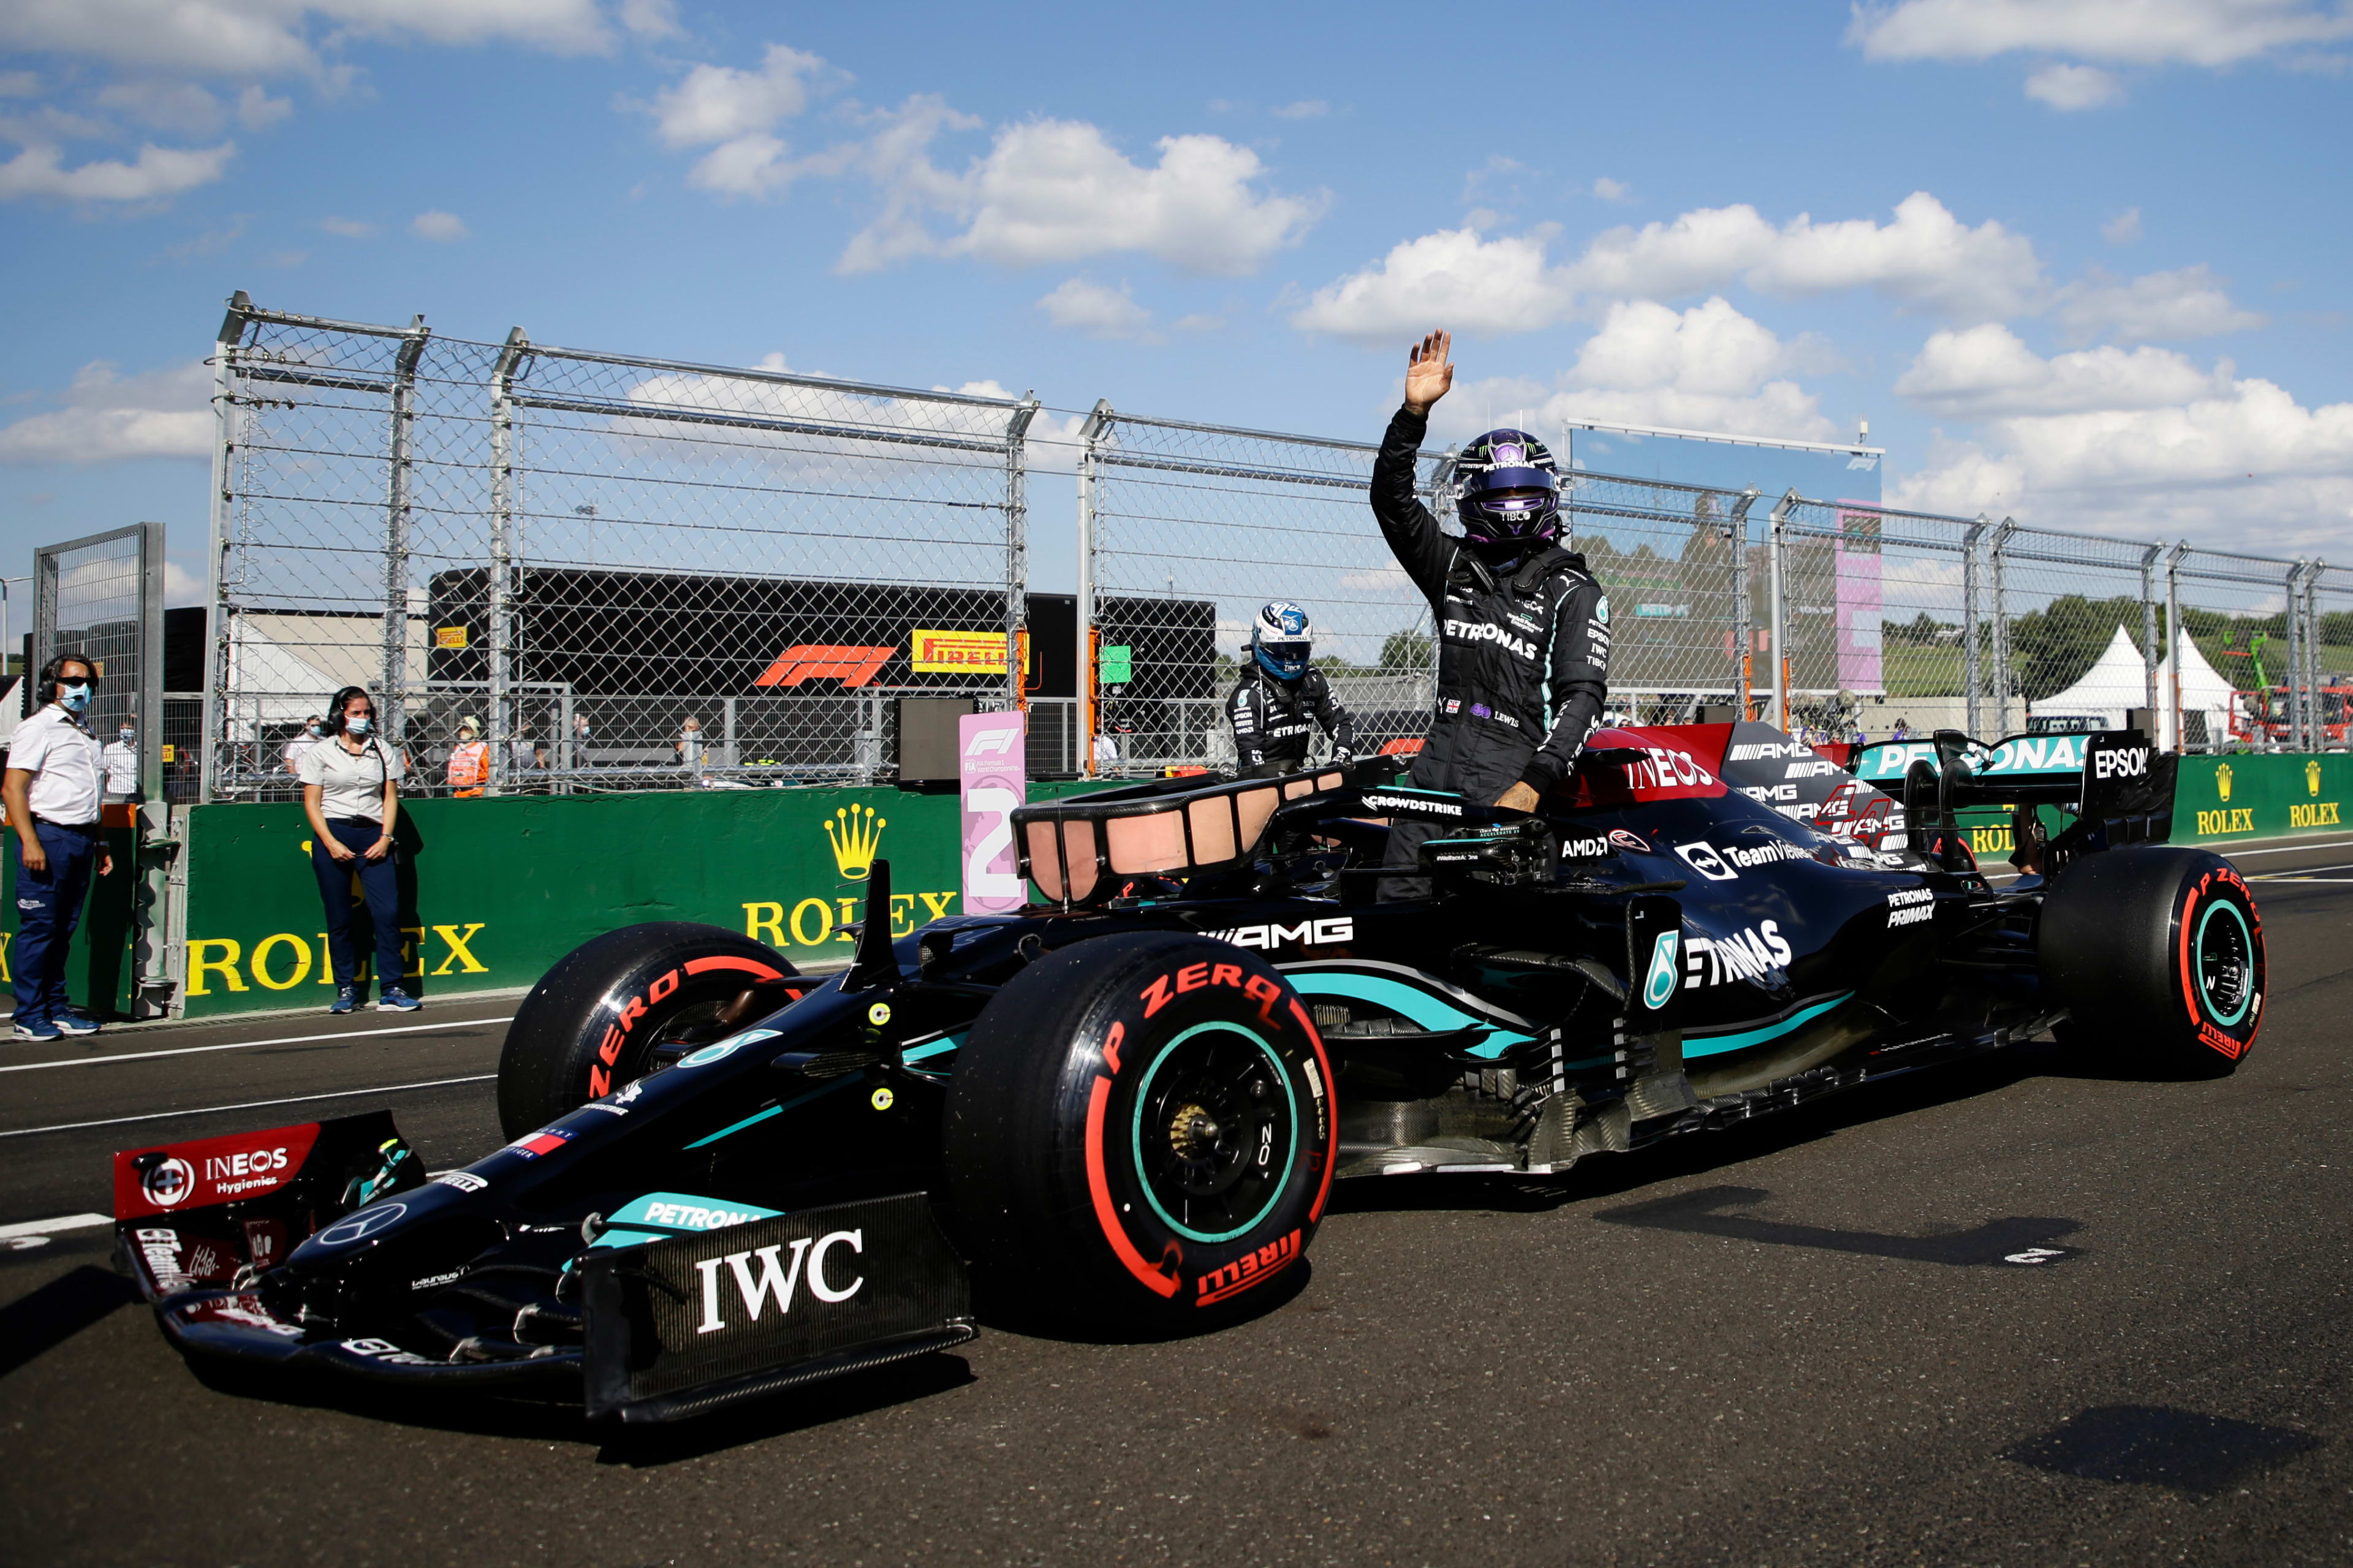 2021 Hungarian Grand Prix qualifying report and highlights Hamilton roars to Hungary pole, as Bottas denies Verstappen front-row start Formula 1